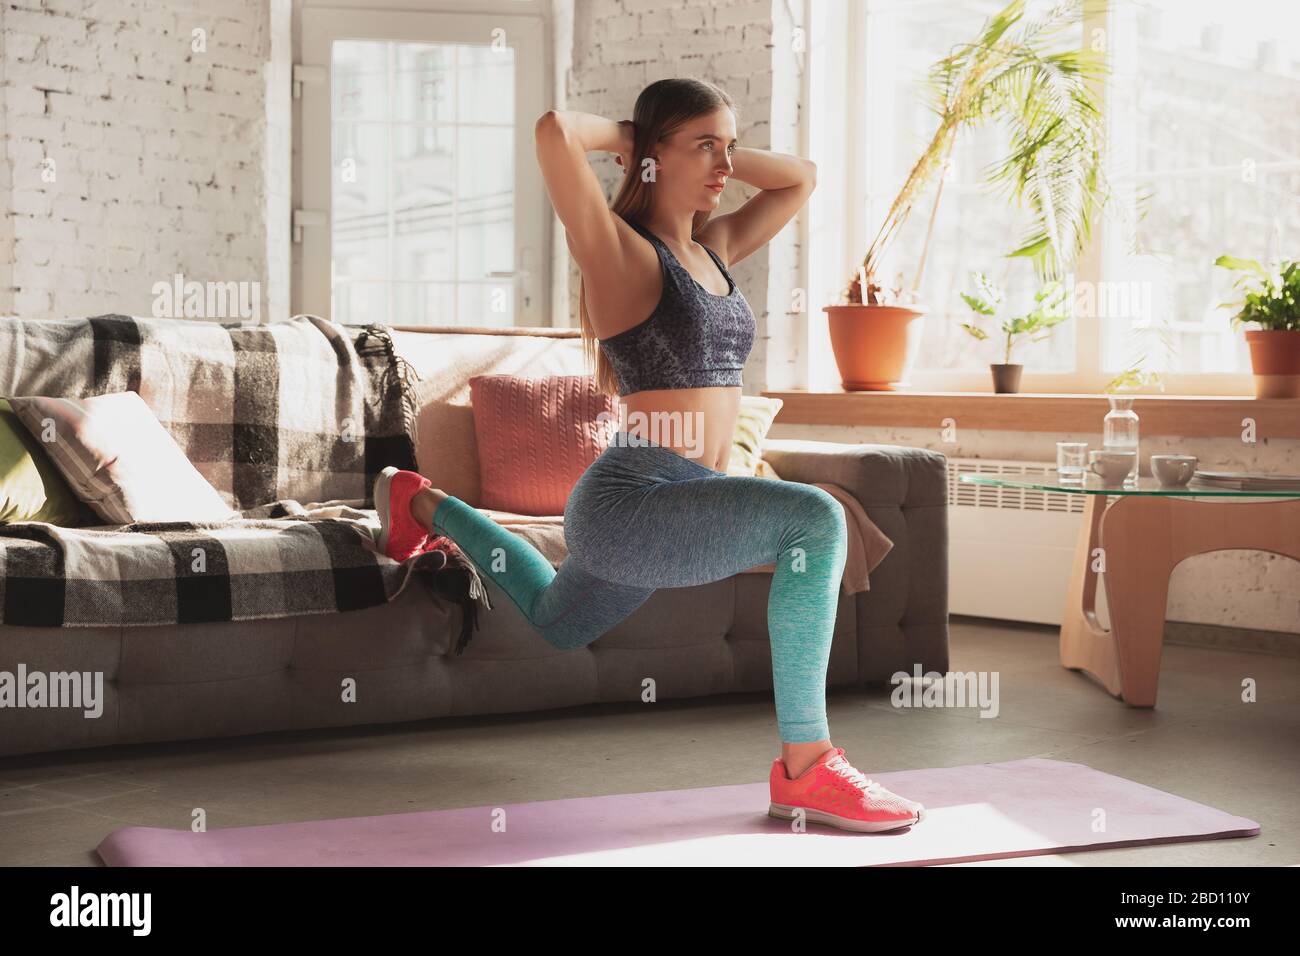 Young woman teaching at home online courses of fitness, aerobic, sporty lifestyle while quarantine. Getting active while isolated, wellness, movement concept. Exercises for stretching, balance. Stock Photo